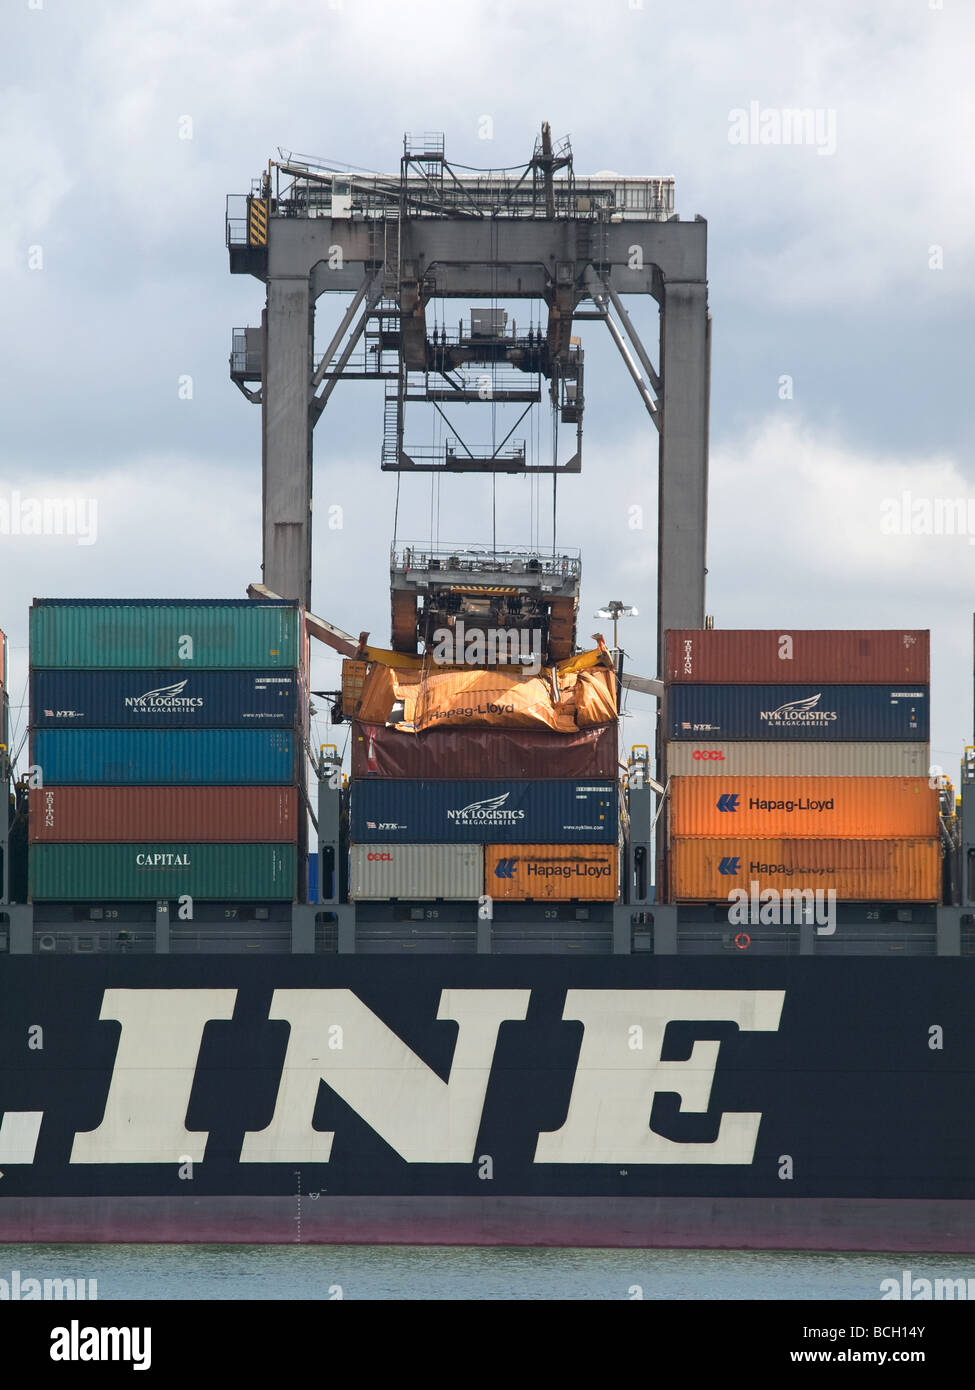 Gantry crane boom collapsed onto container ship NYK Themis during loading in Southampton UK Stock Photo